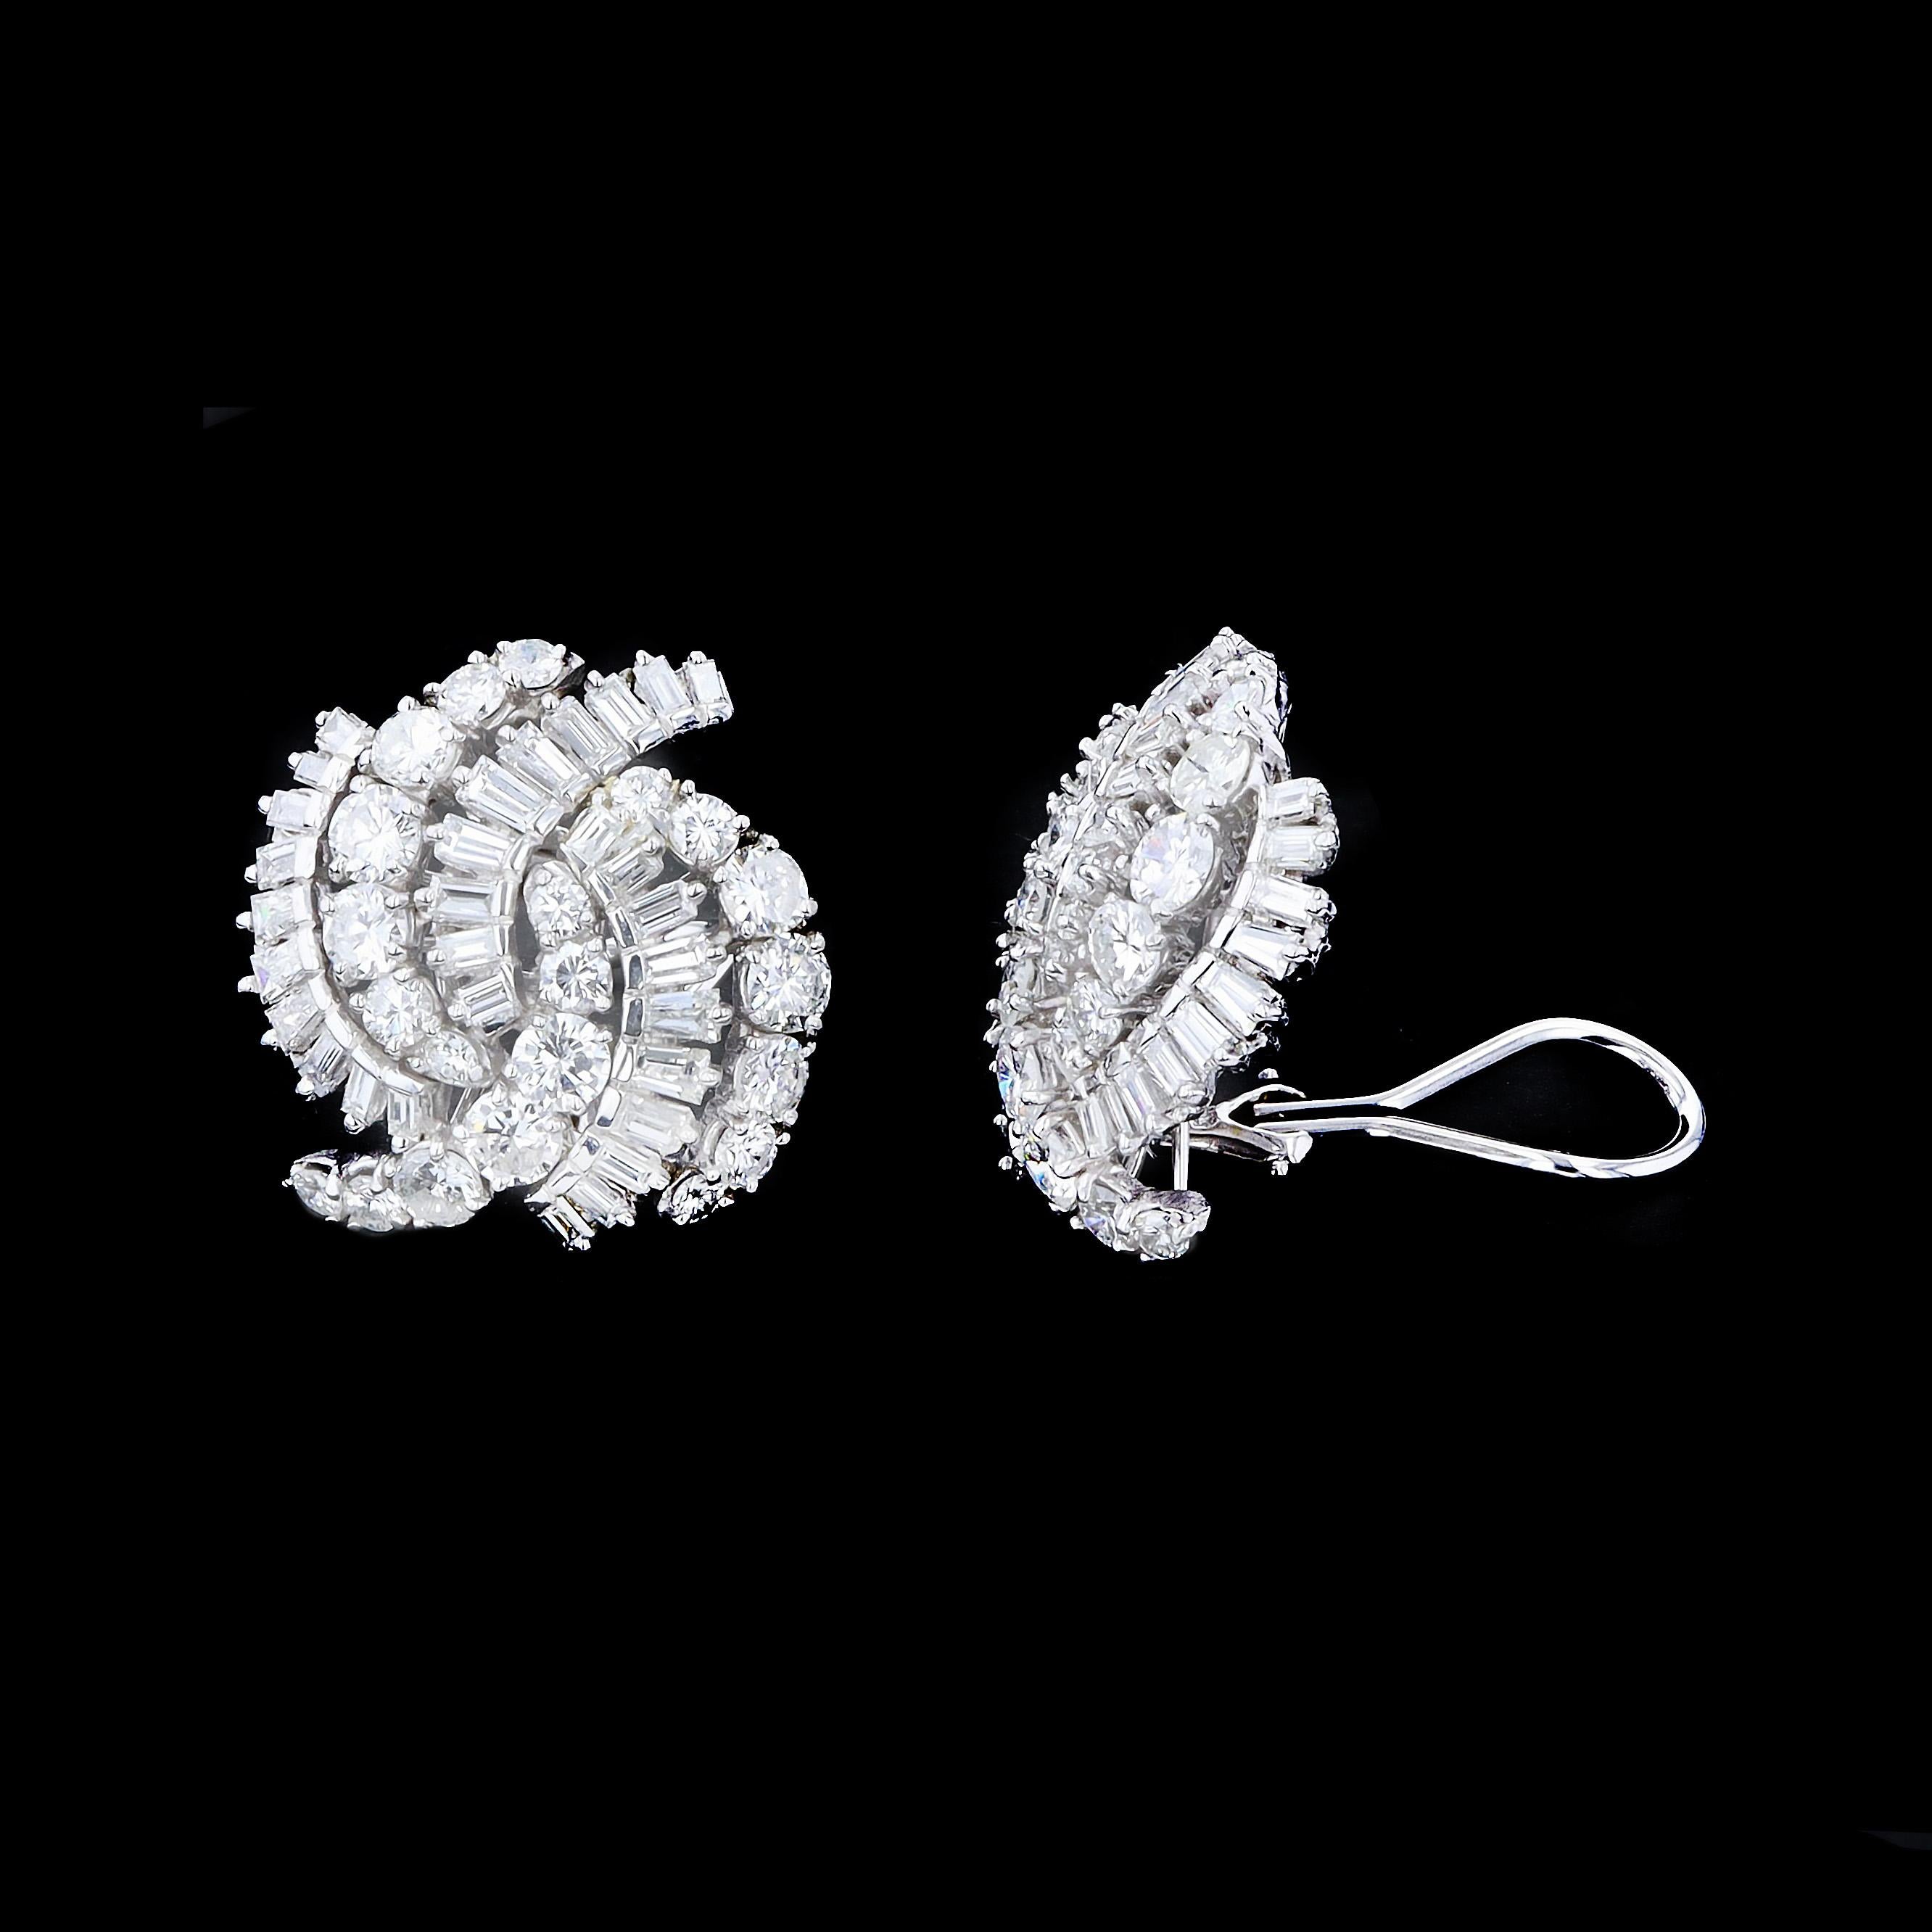 Exceptional curved lines of glittering diamonds merge to create a stunning statement in these on the ear estate earrings. The earrings contain G color VS1 clarity diamonds weighing 6.00 TWT ctw.

